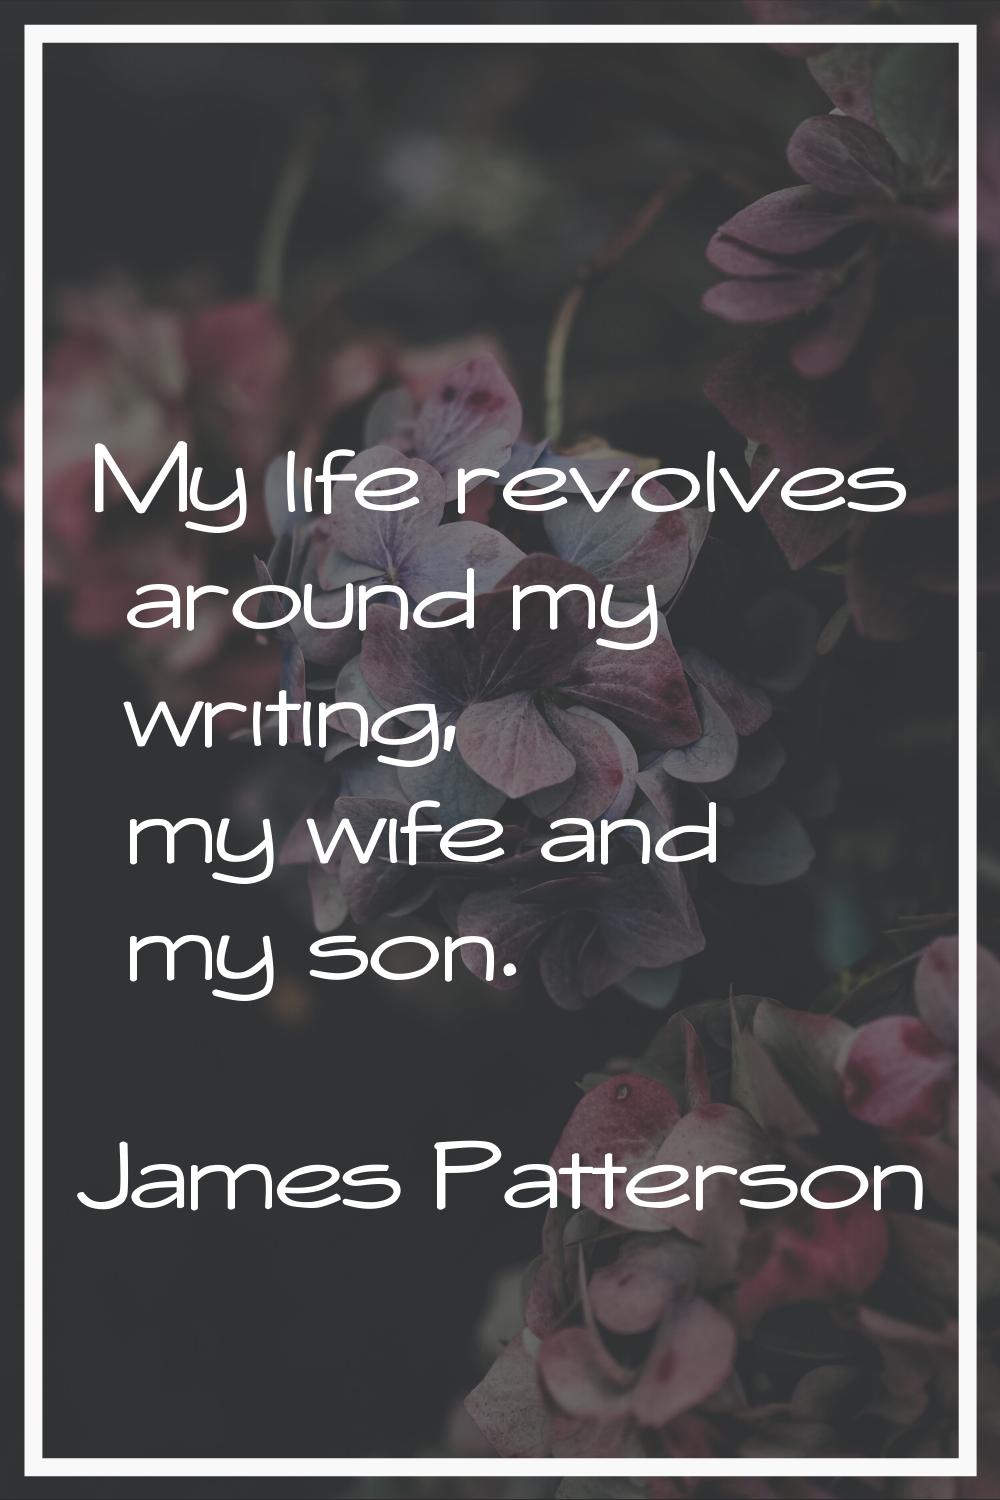 My life revolves around my writing, my wife and my son.